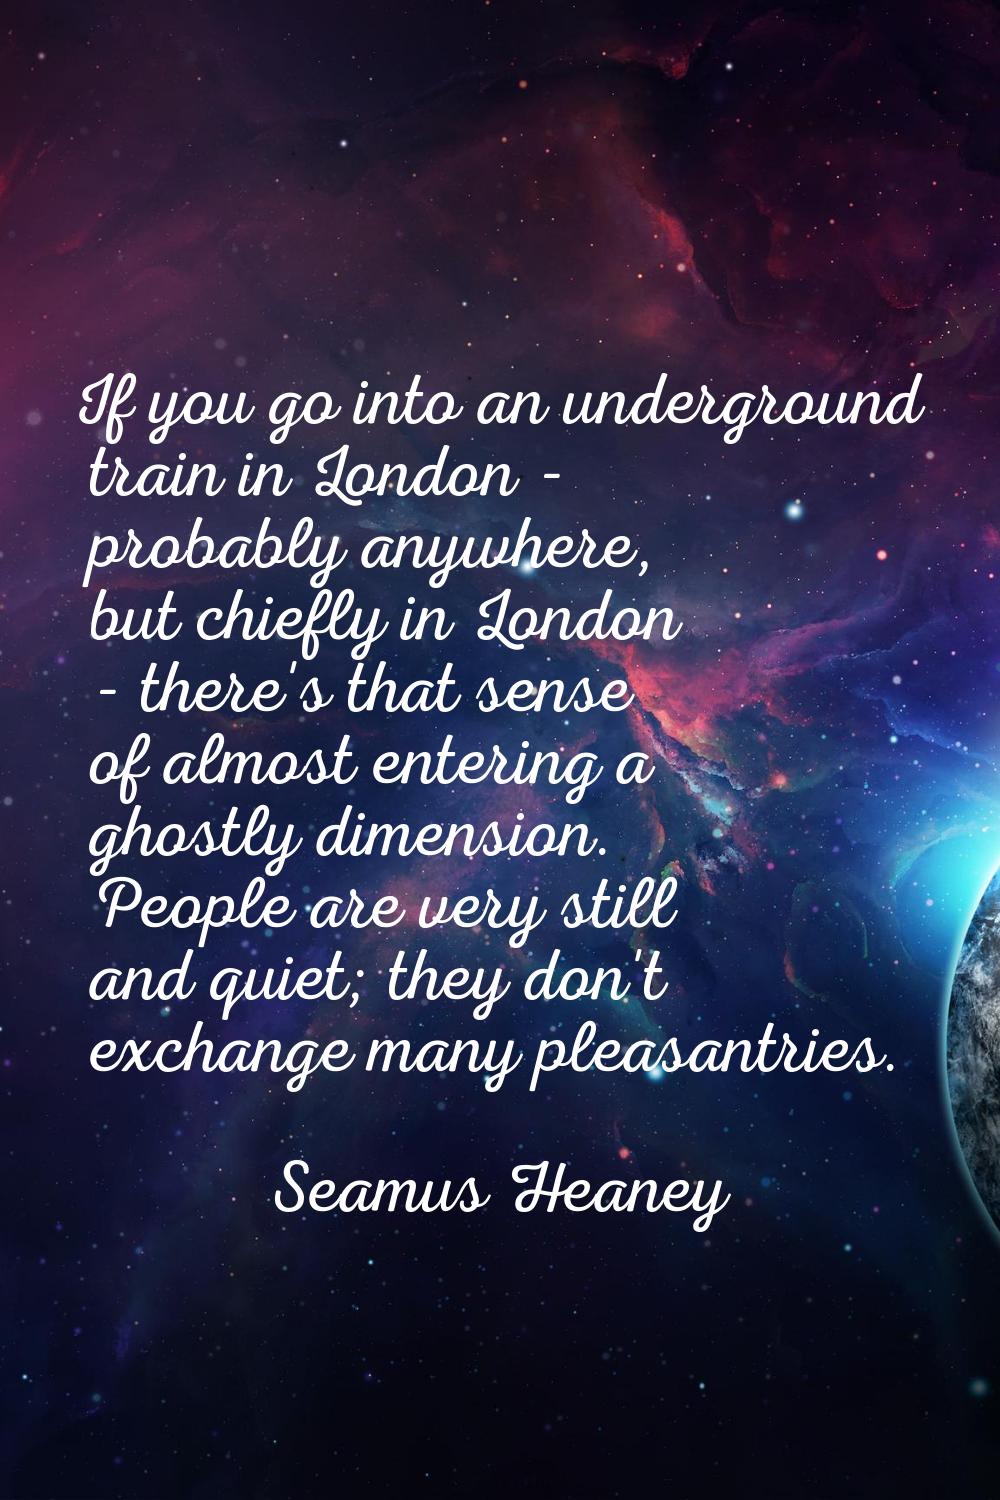 If you go into an underground train in London - probably anywhere, but chiefly in London - there's 